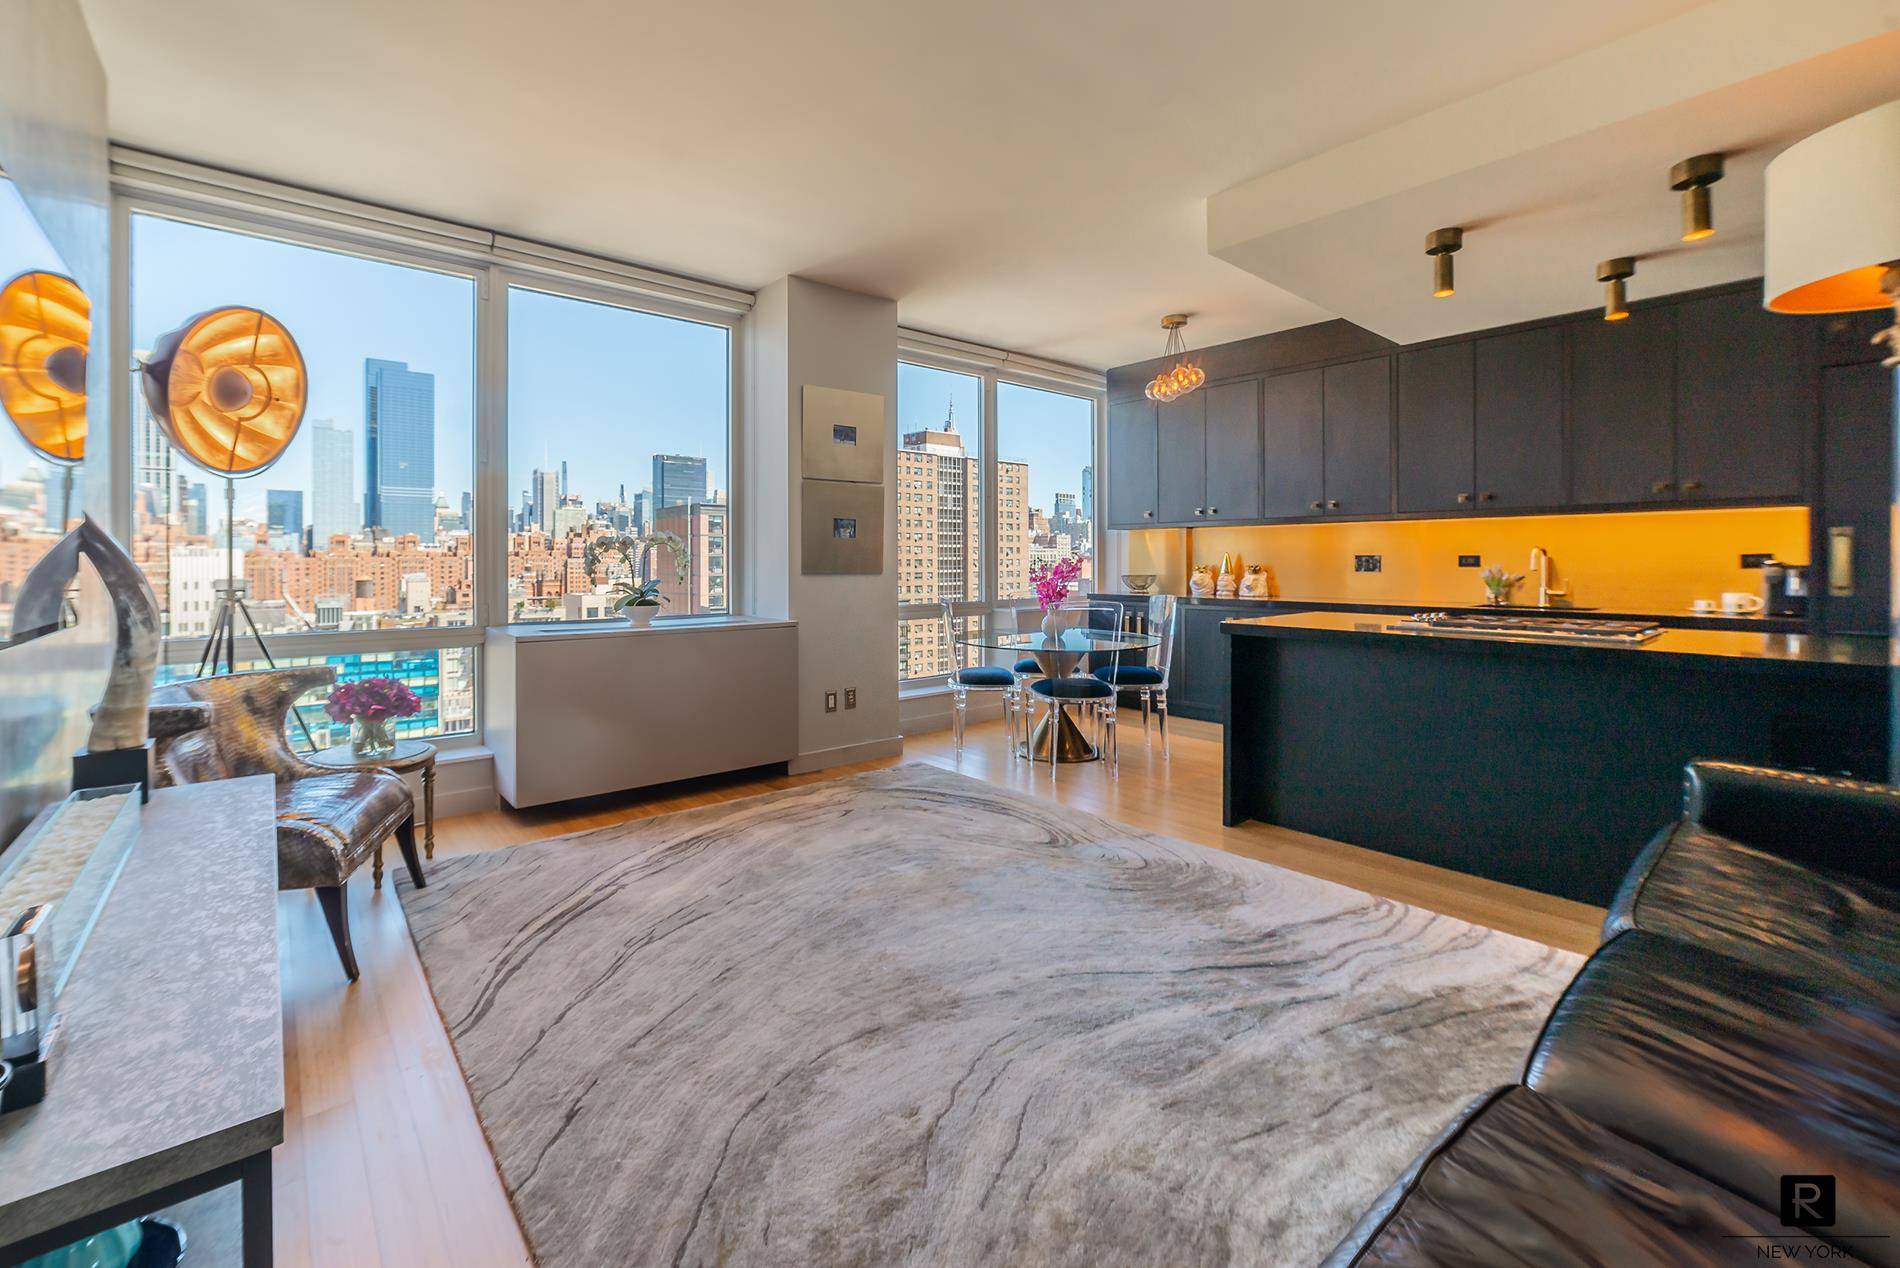 Premium, fully renovated one bedroom, one bathroom luxury apartment located on the 17th floor of the highly desirable condominium, The Caledonia.